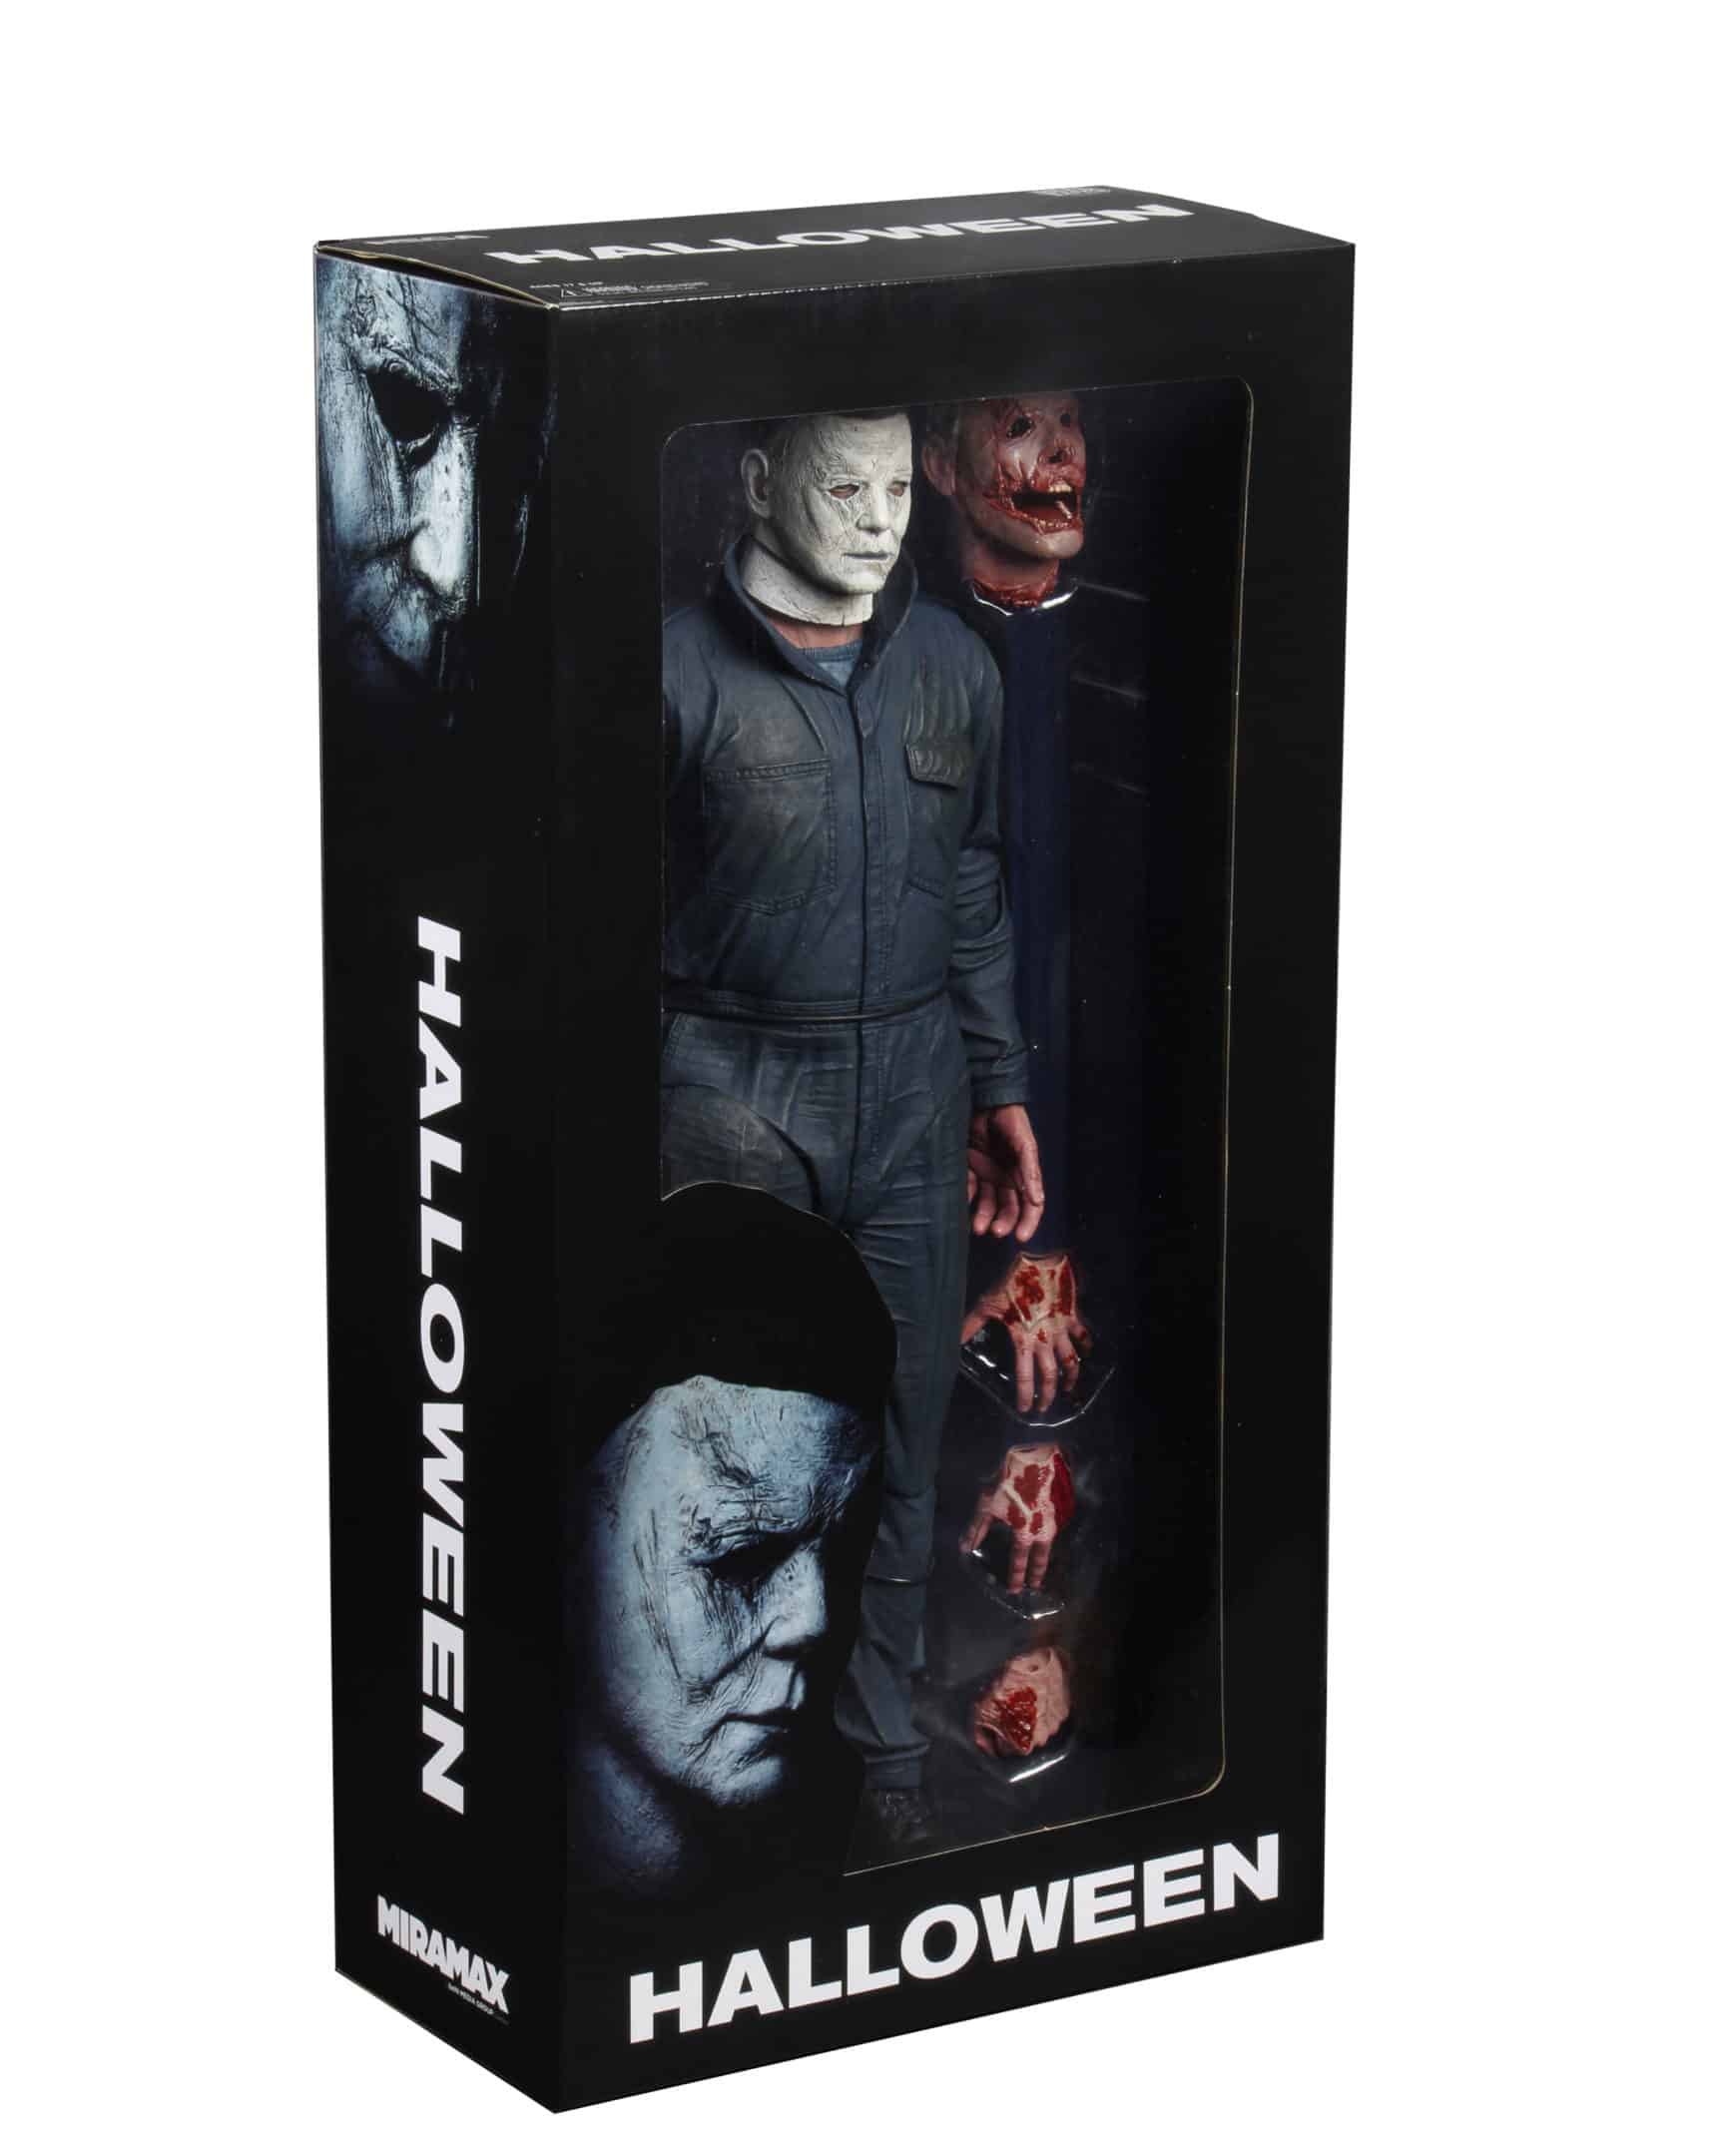 The NECA Vault reopens with limited edition Horror and Batman figures to close out 2022 19